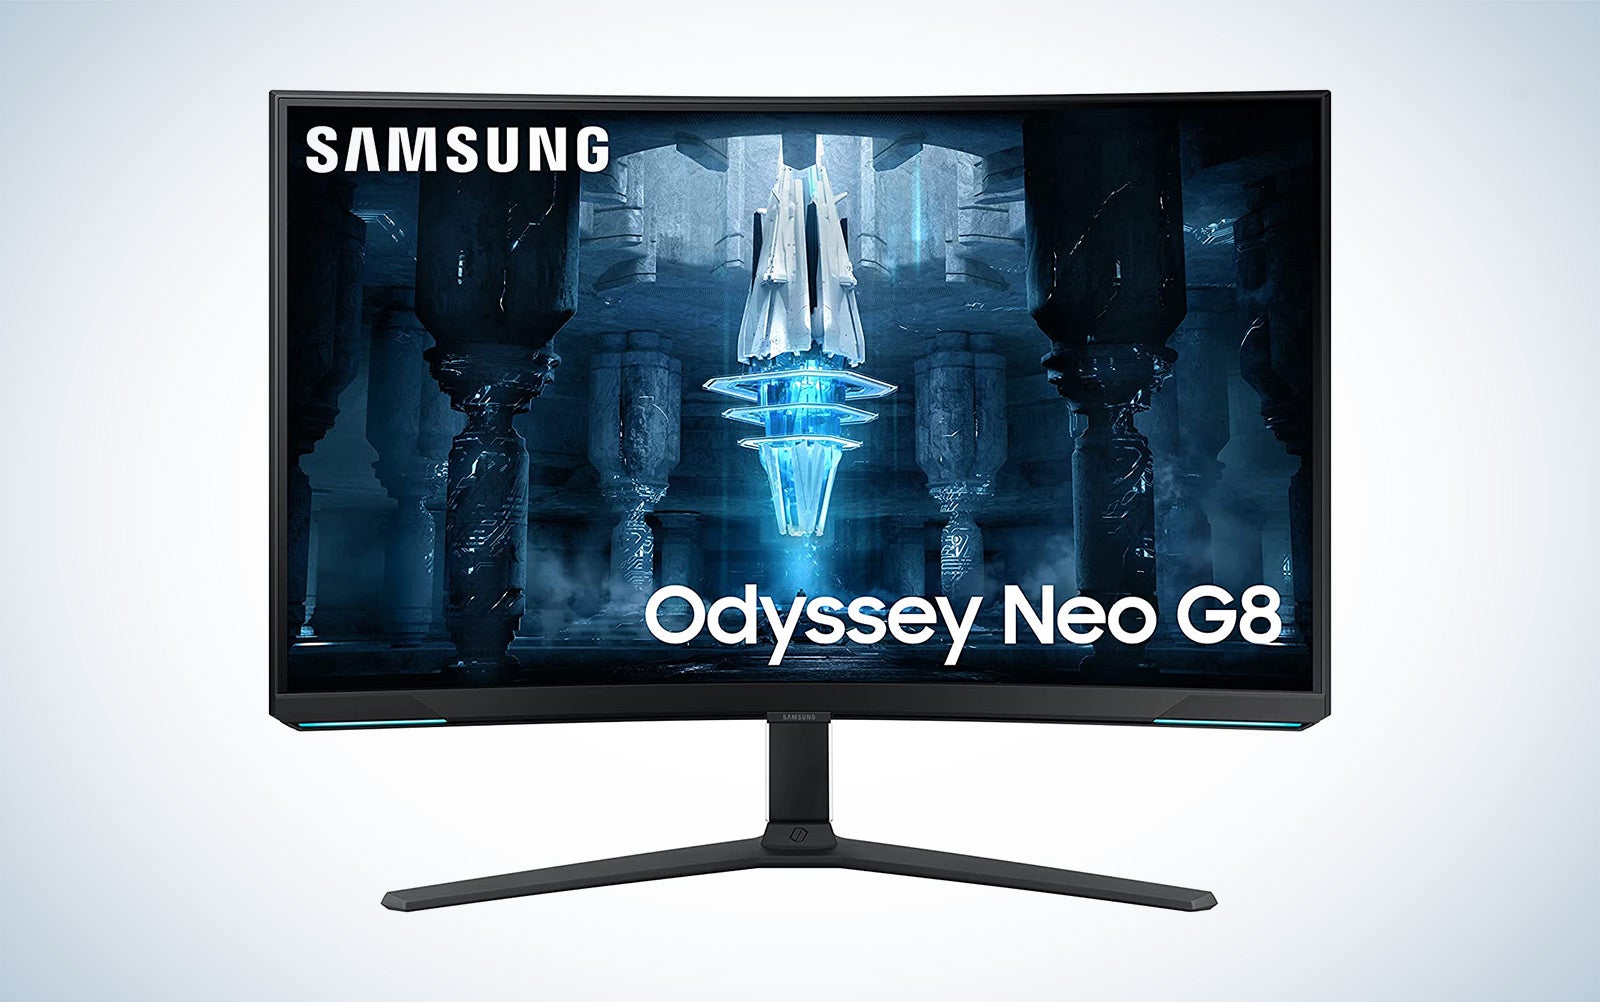 SAMSUNG 32" Odyssey Neo G8 is the best Samsung monitor for gaming.